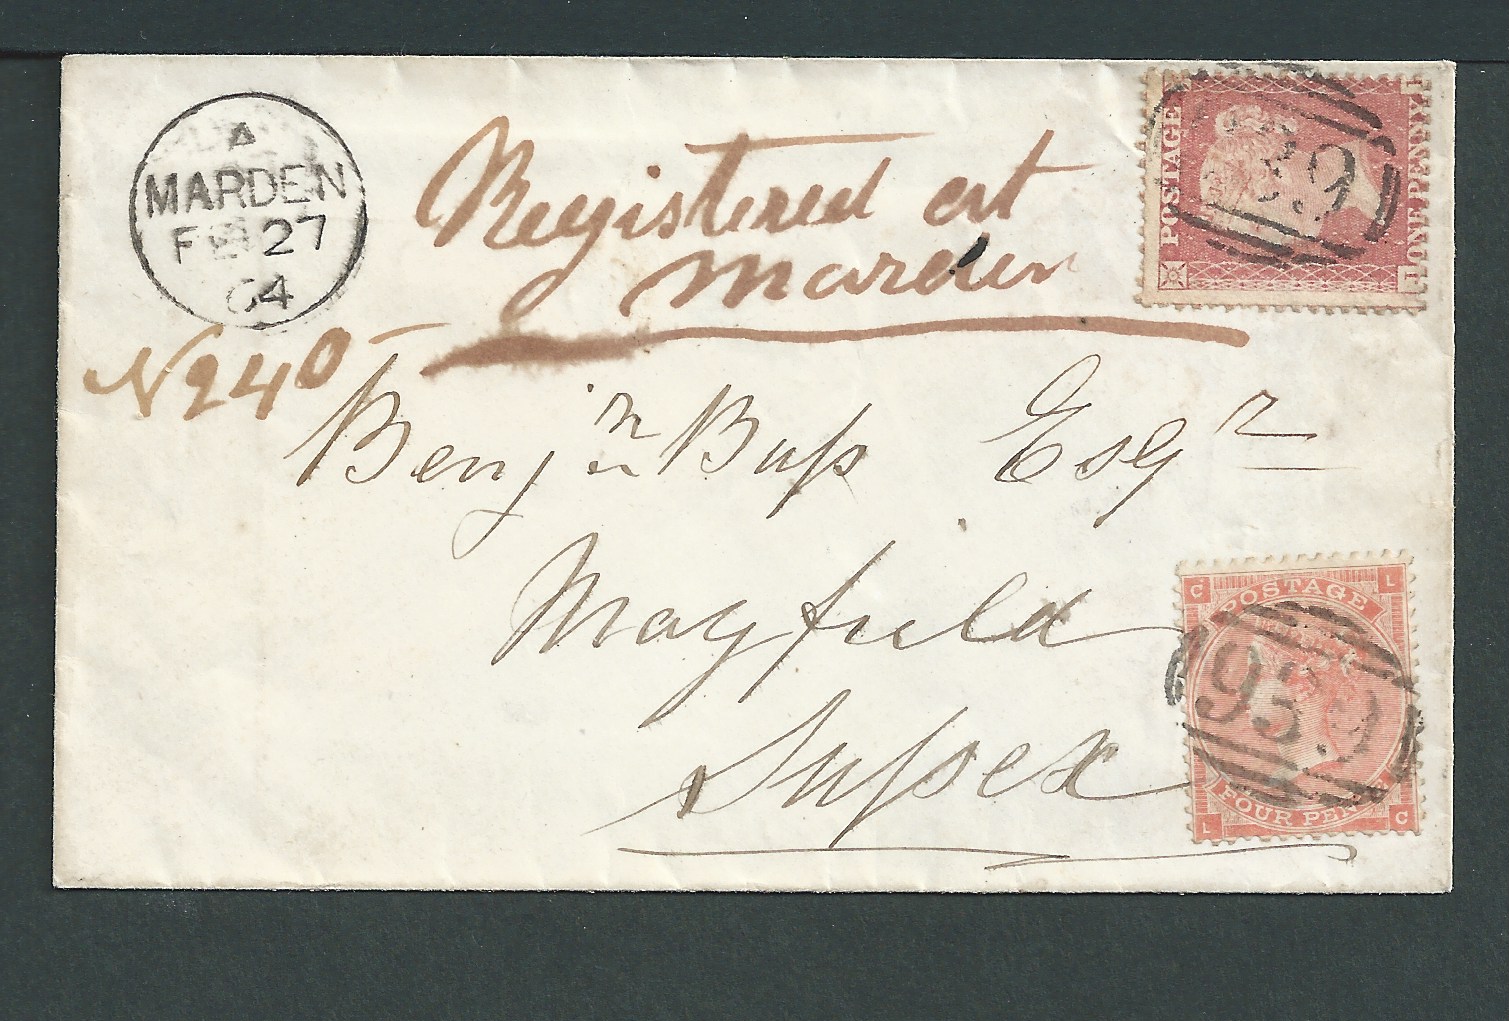 G.B. - Kent 1864 Registered cover from Marden to Sussex franked by a 1d red and 1862 4d each cancel